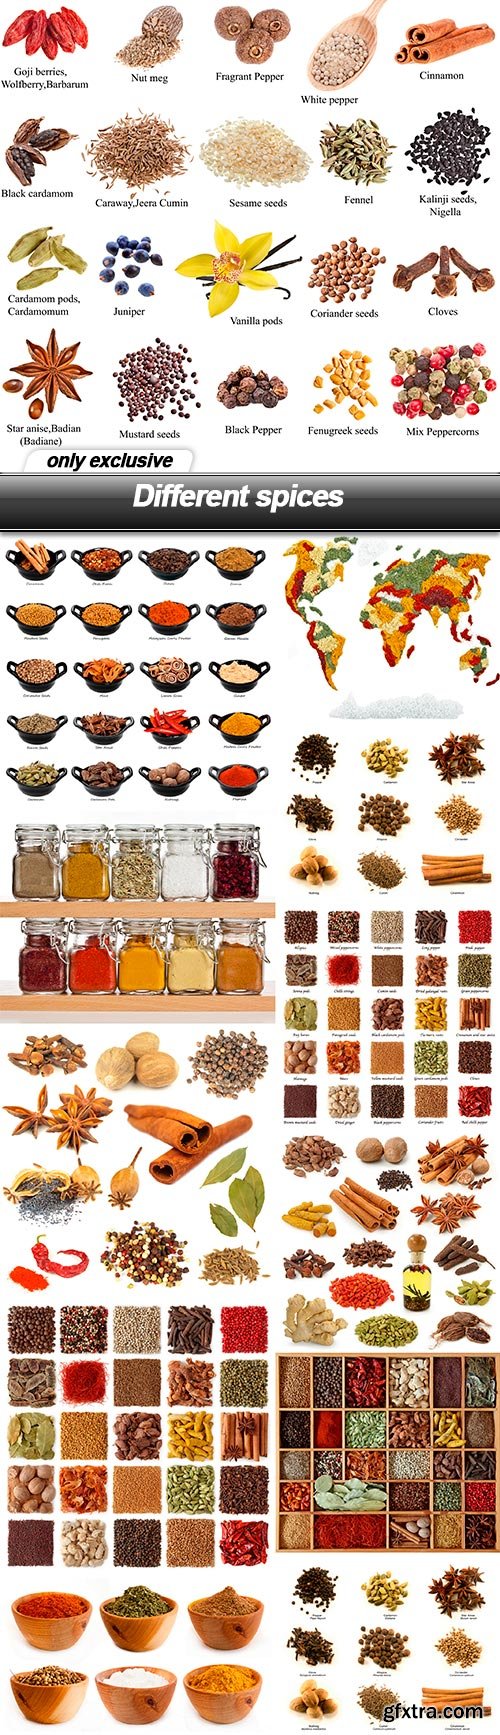 Different spices 2 - 12 UHQ JPEG